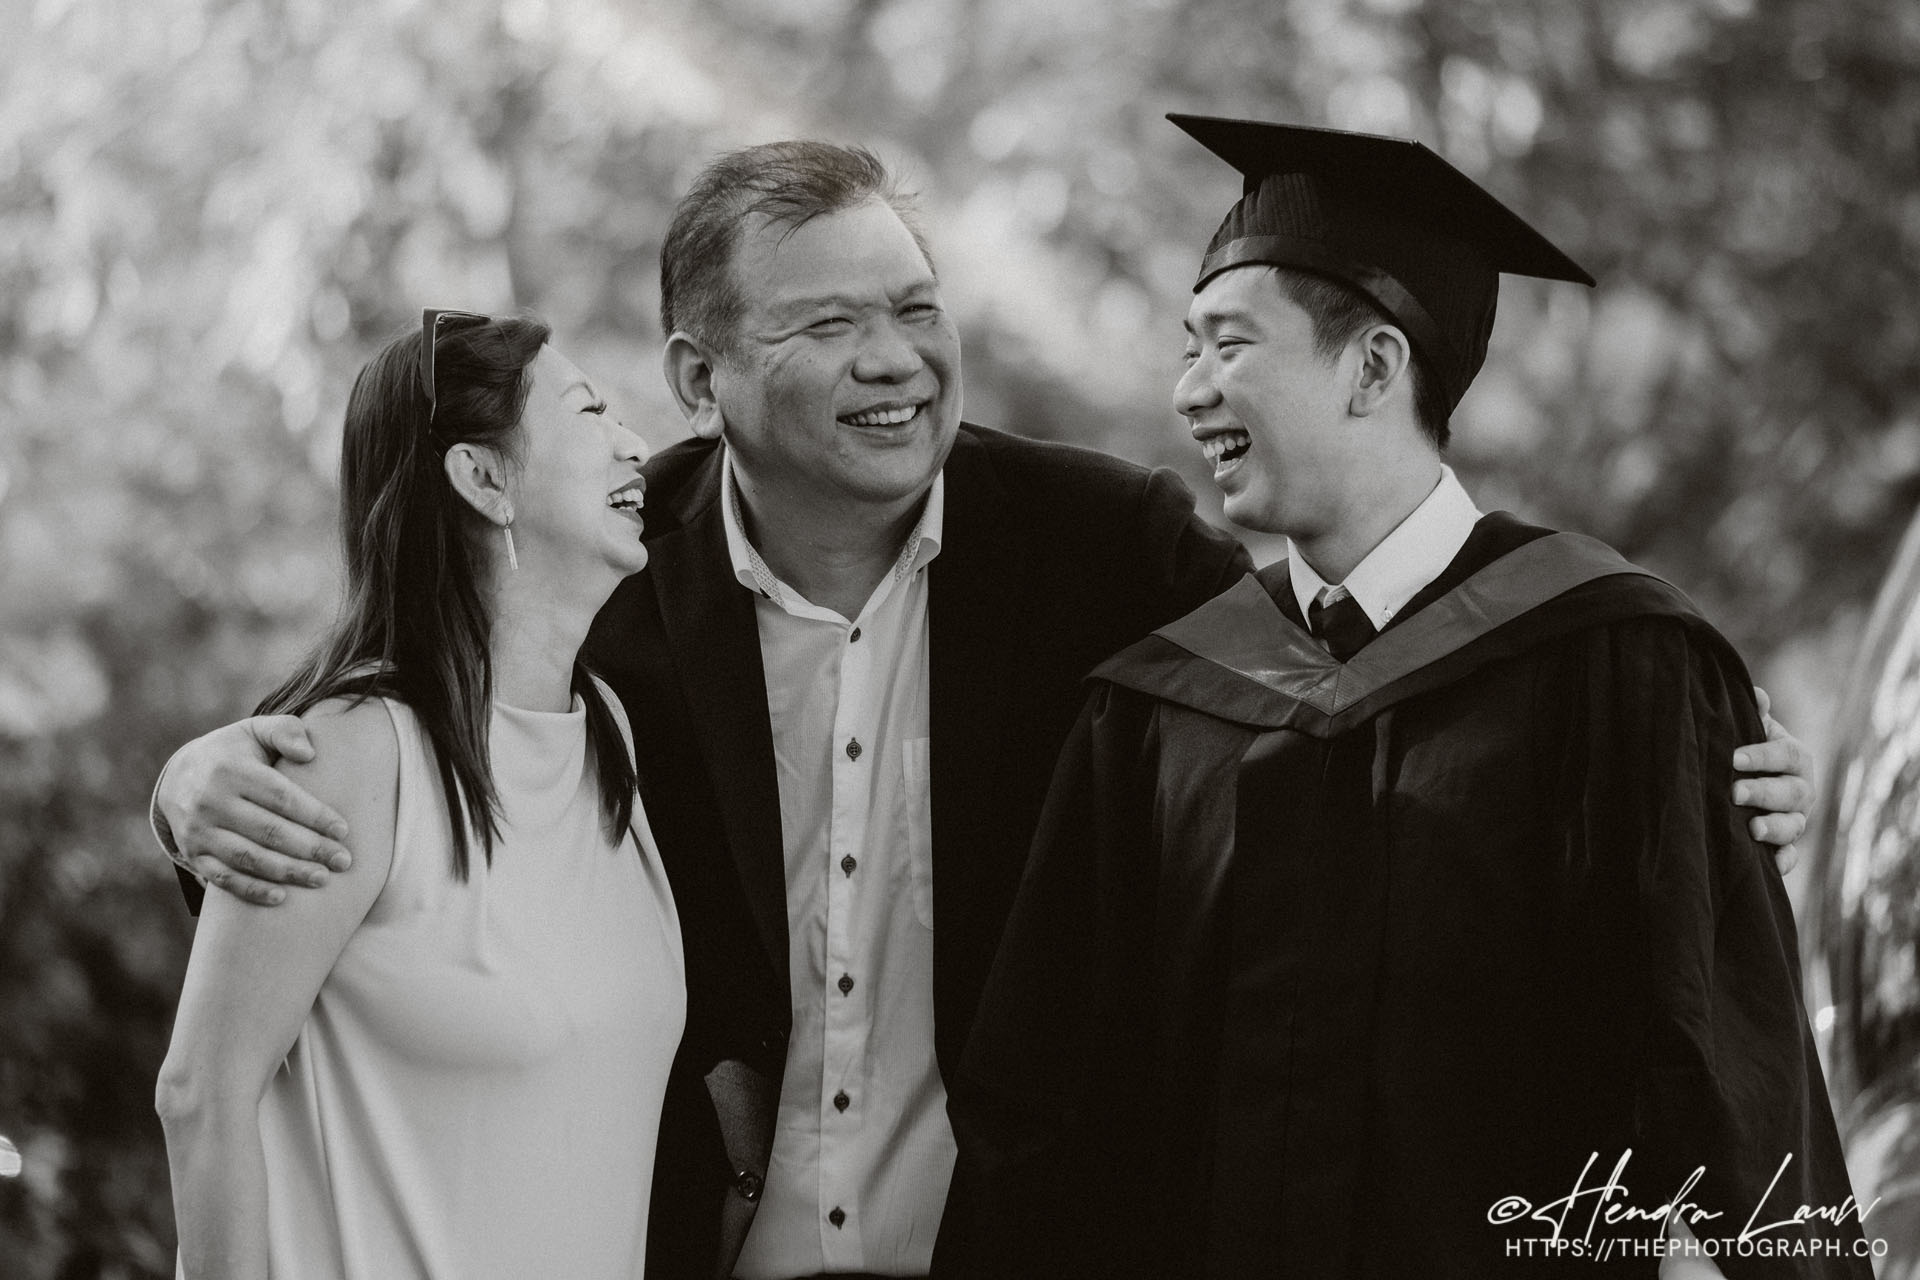 Outdoor graduation photoshoot with family